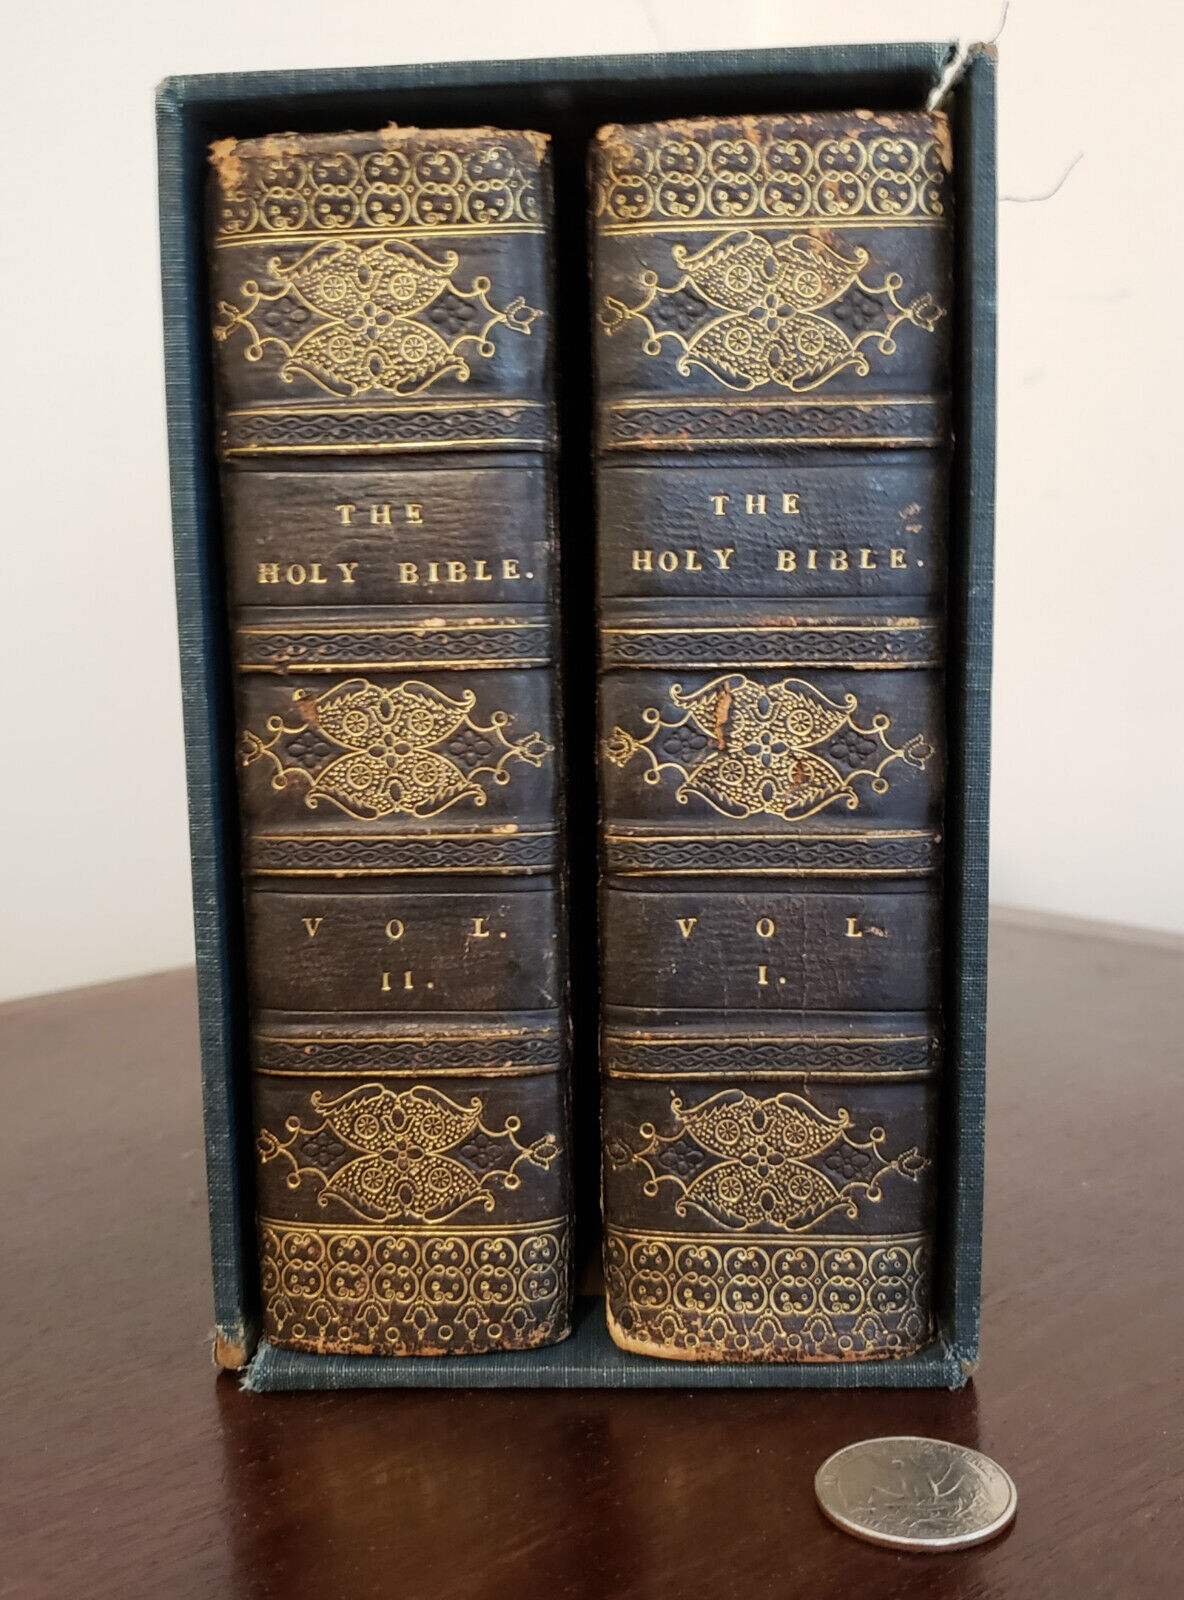 RARE Antique 1811 Holy Bible in 2 Volumes, Edinburgh: Printed by Blair and Bruce